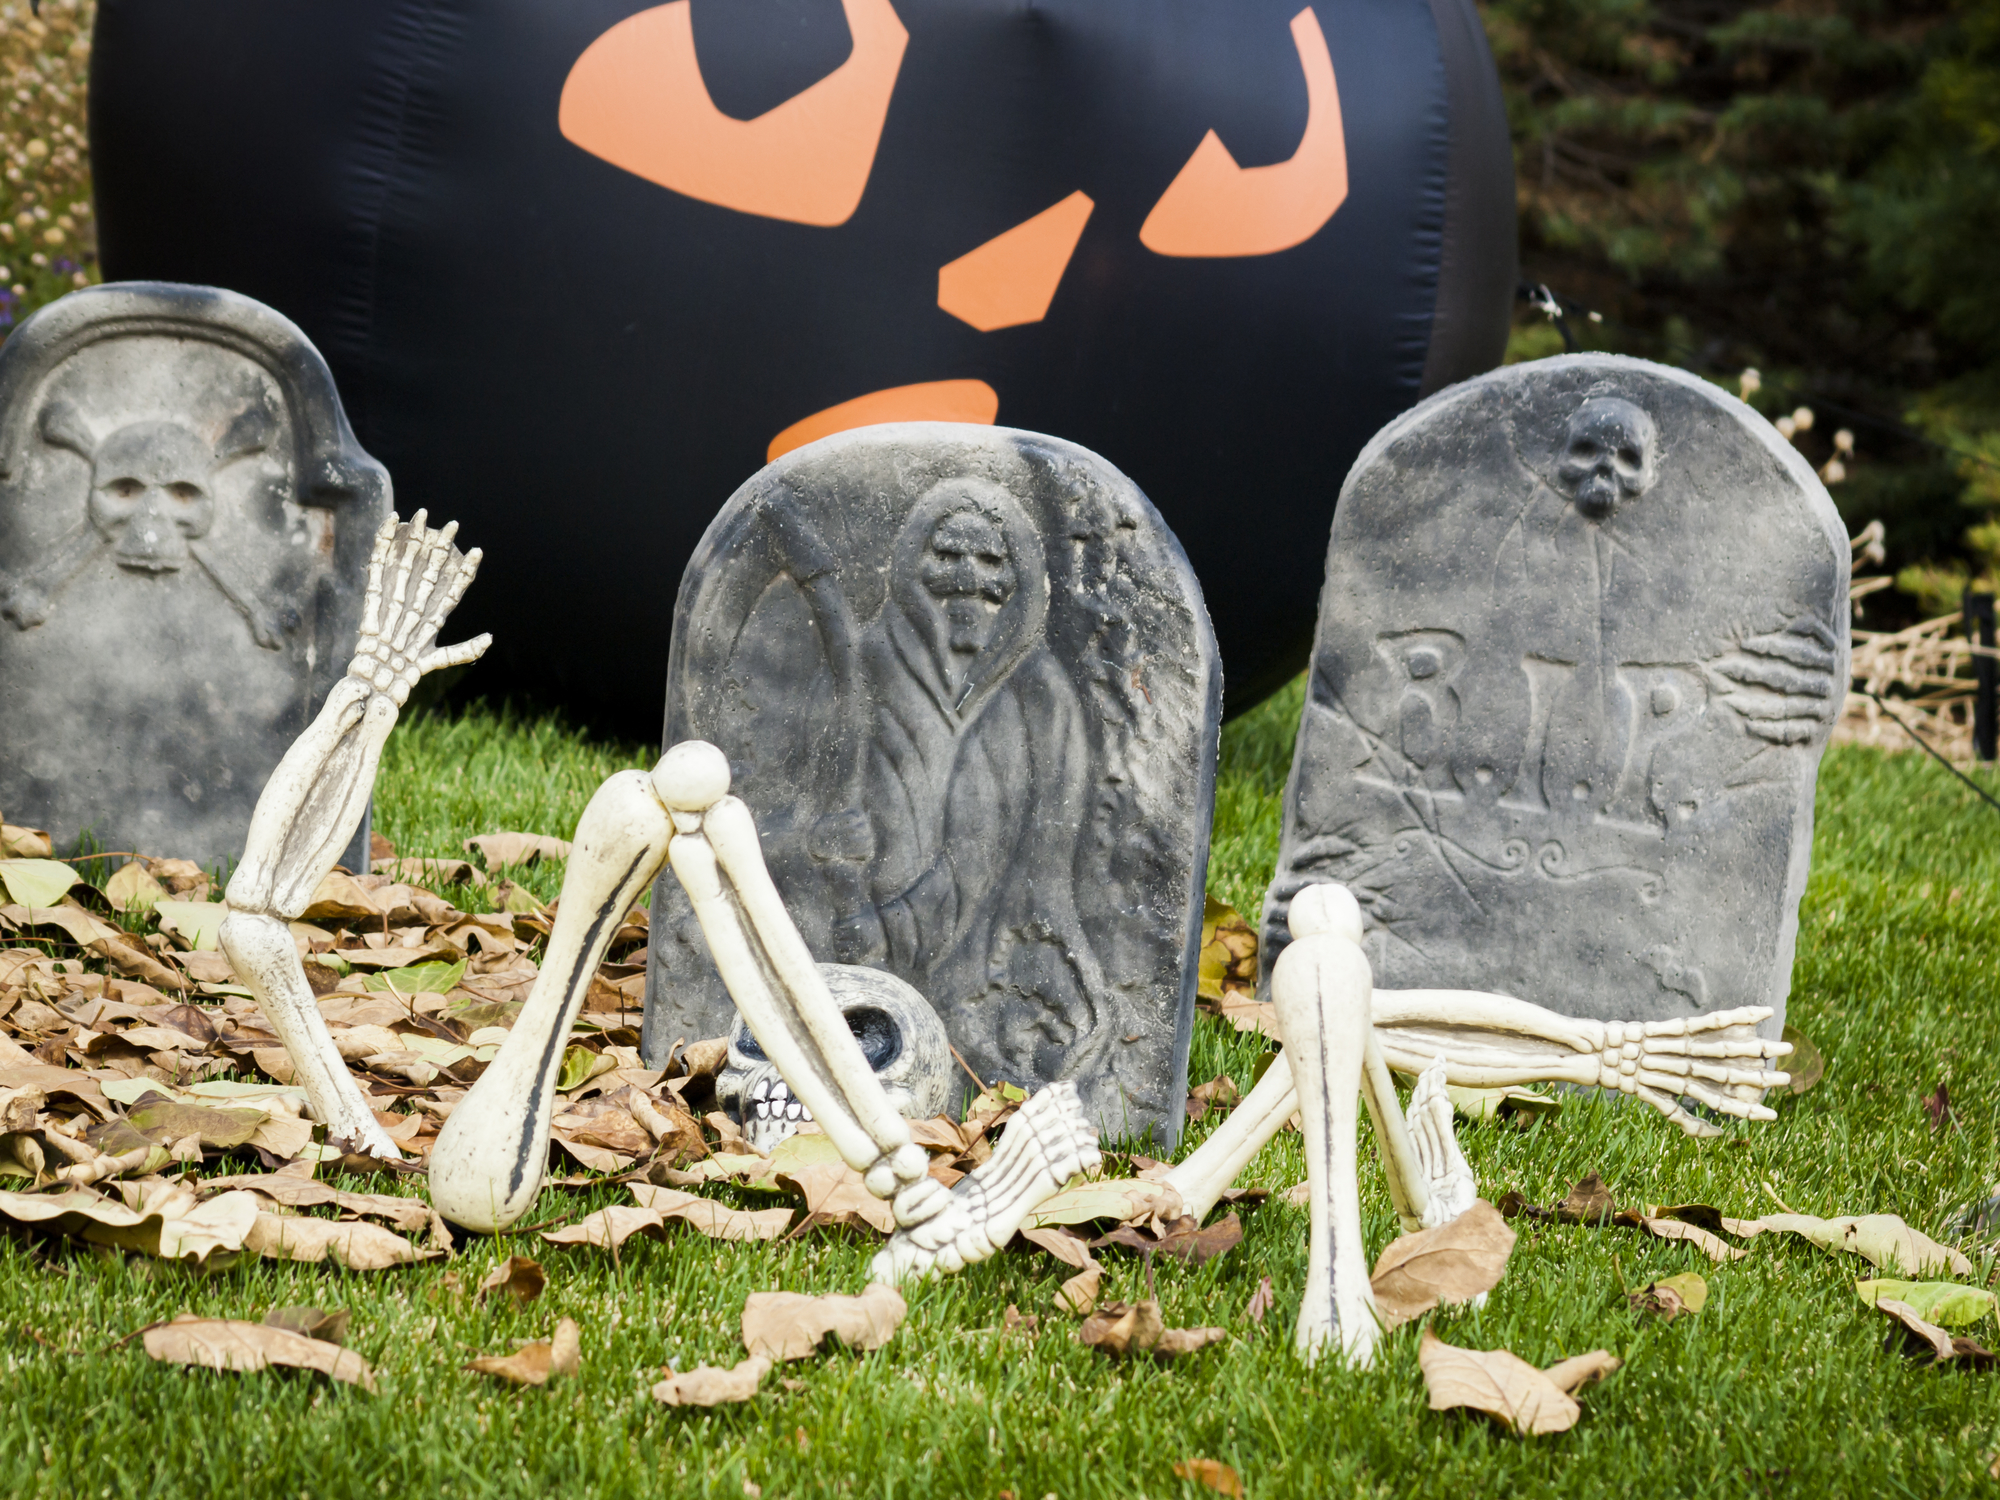 How to Prepare Your Front Yard for Halloween